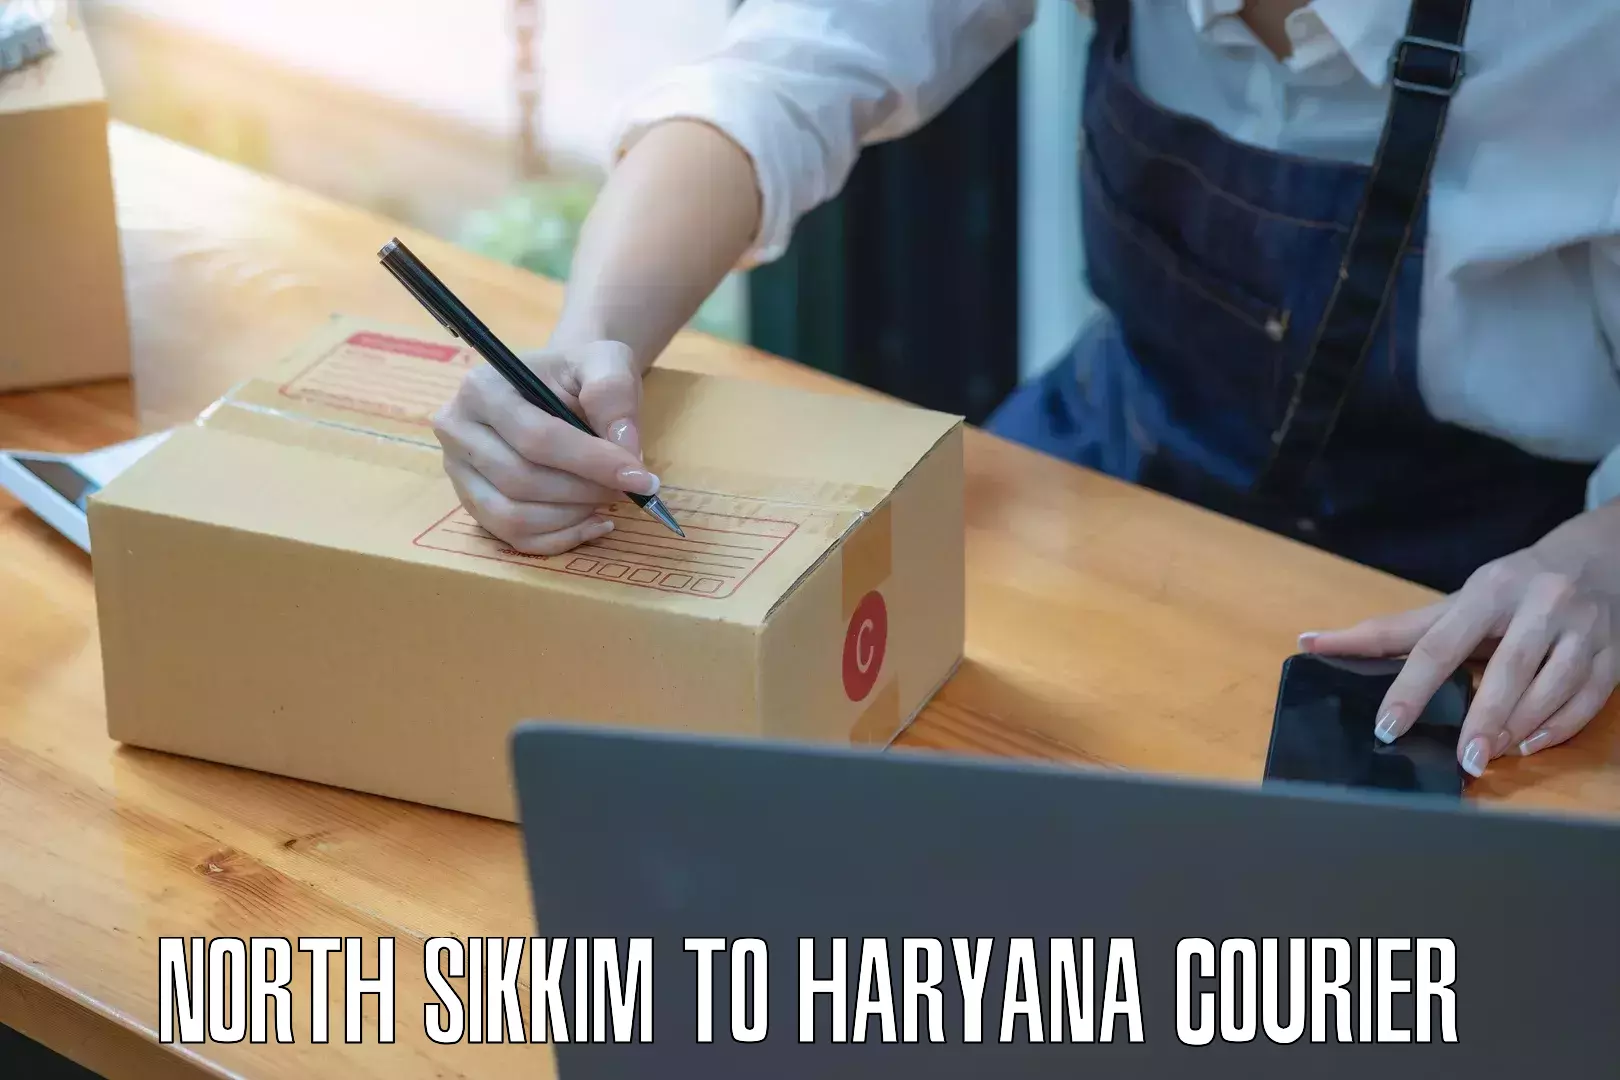 Online courier booking North Sikkim to Hansi